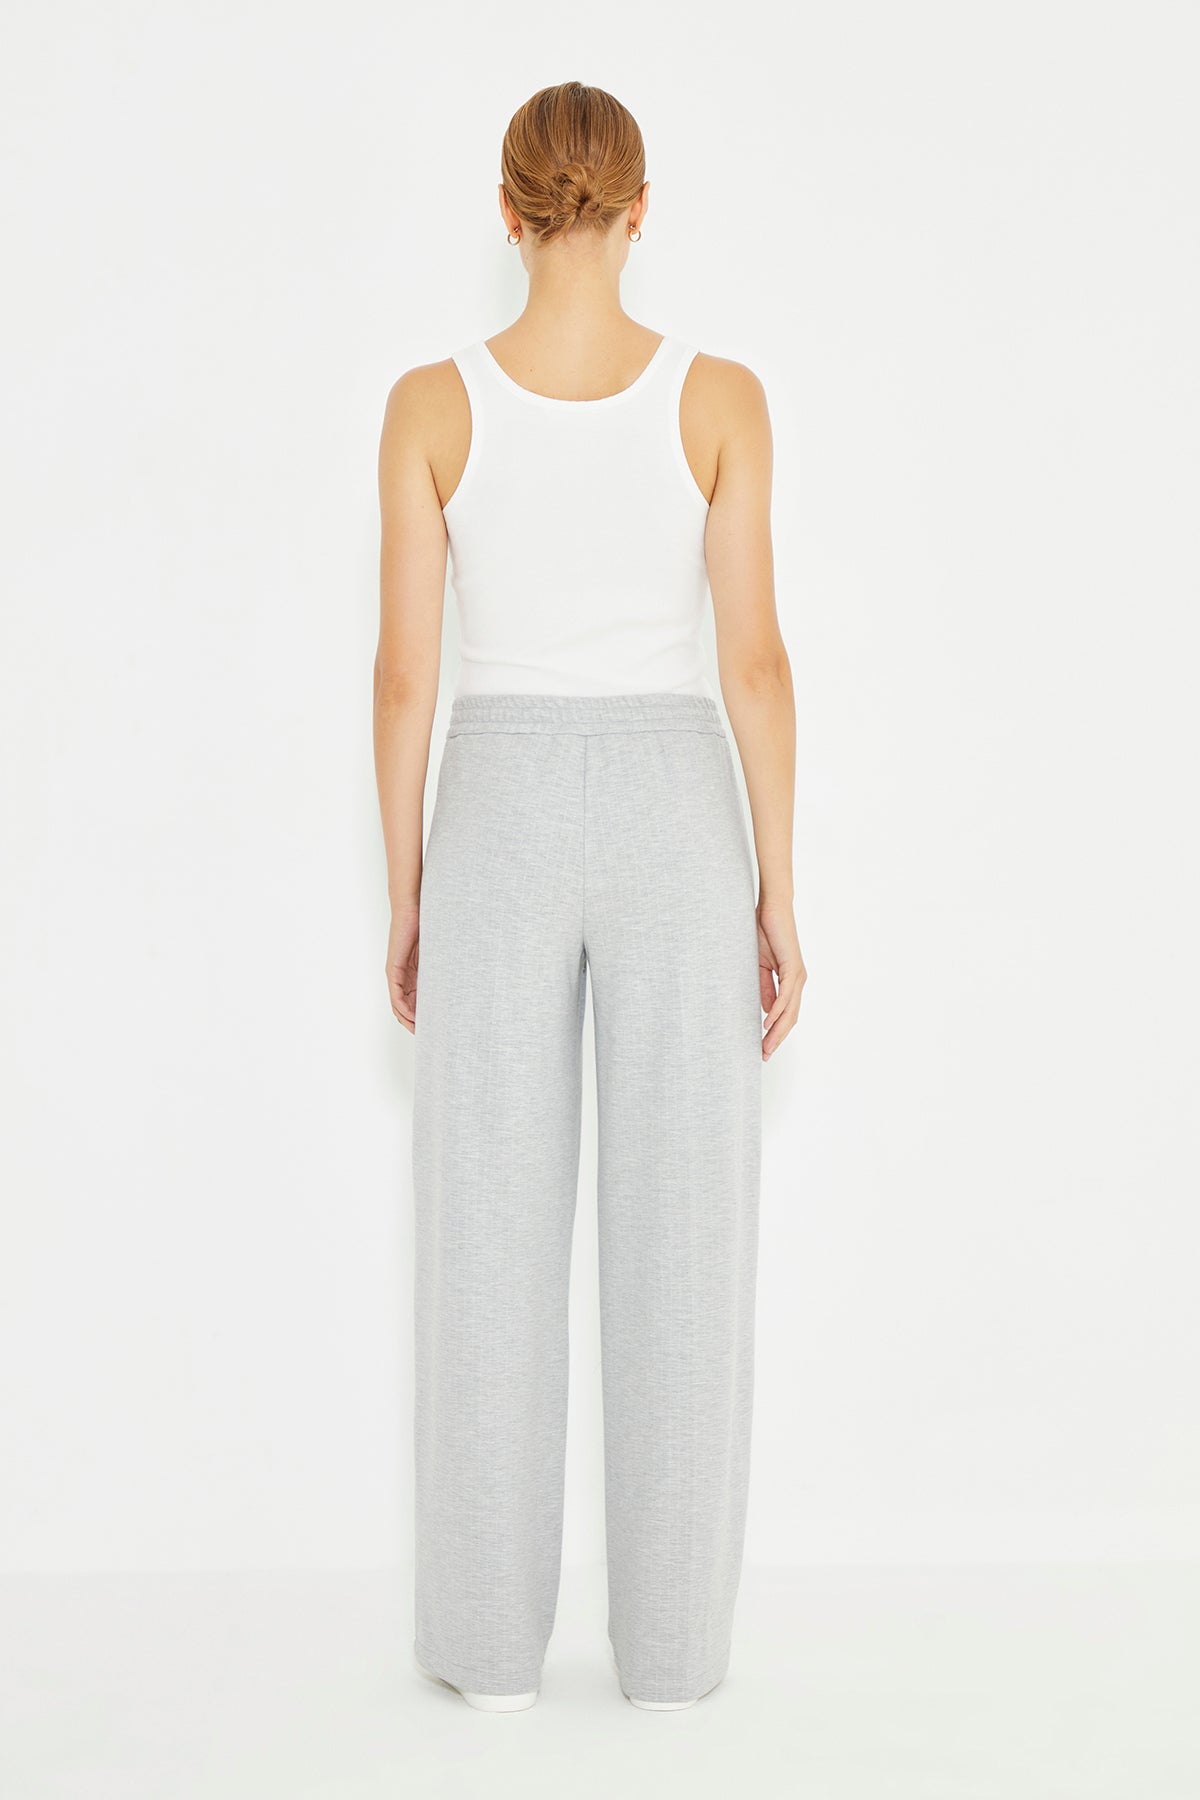 Grey Striped Front Rib And Side Stripe Detail Women's Trousers